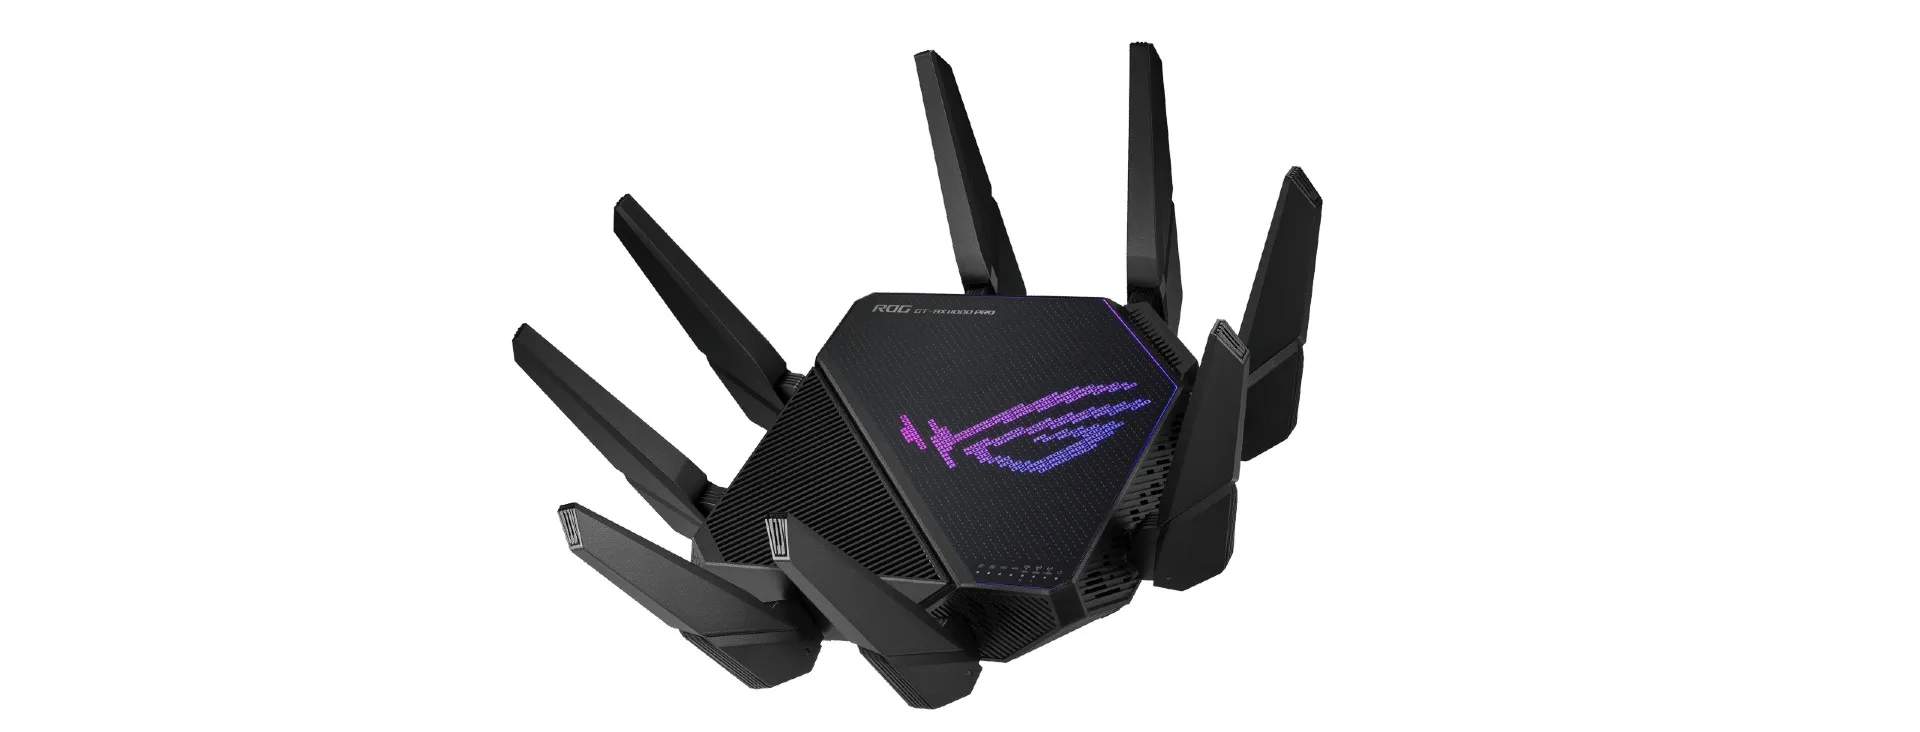 top-10-routers-of-2023-reviewed-unveiling-the-best-for-gaming-streaming-and-smart-homes